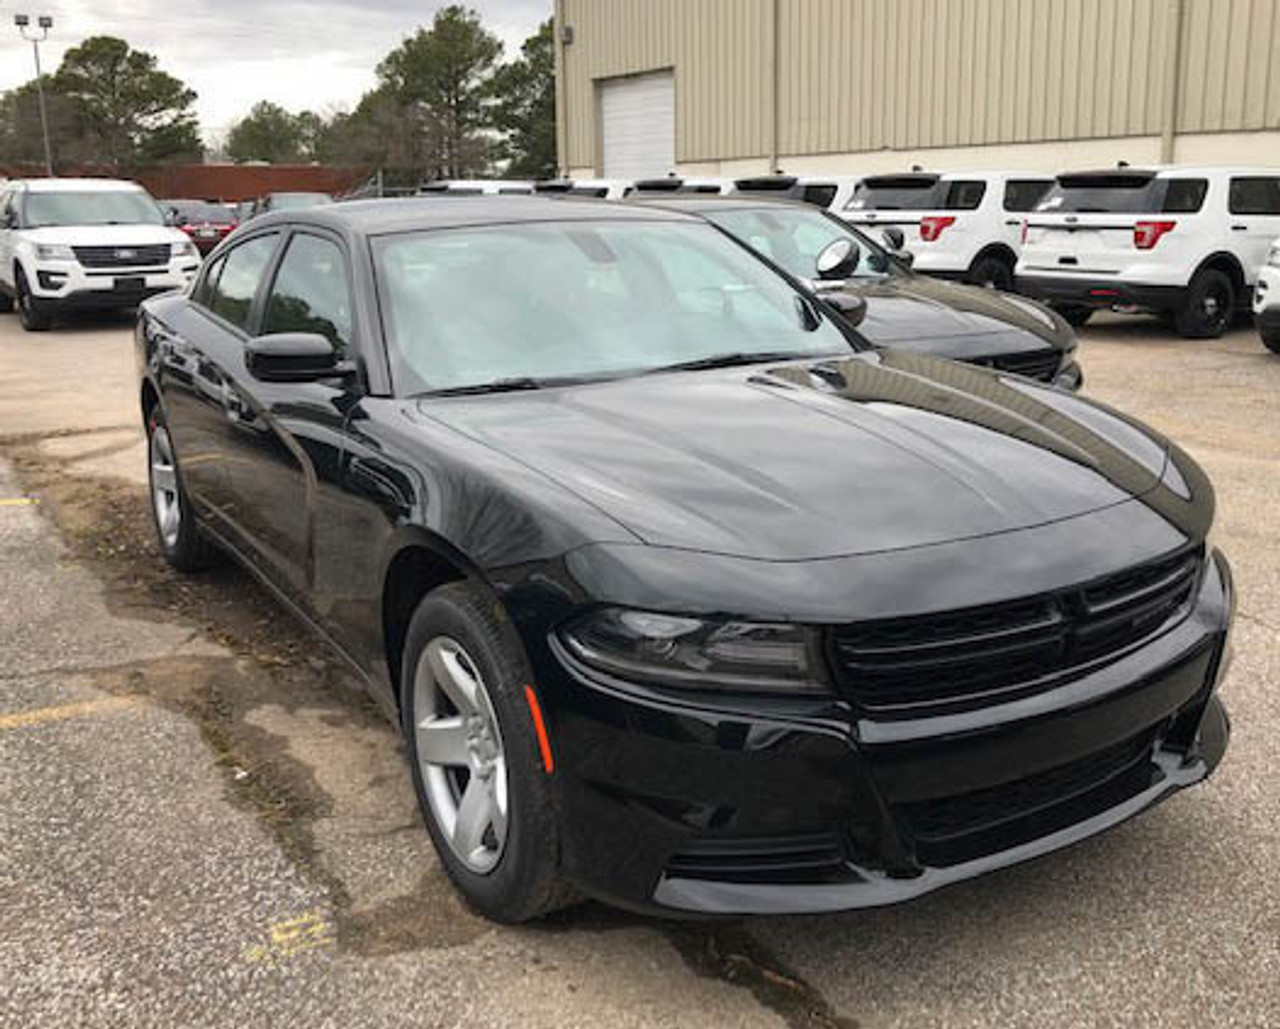 New 2023 Black Dodge Charger PPV V8 RWD ready to be built as an Unmarked Patrol Package Police Pursuit Car (Emergency Lighting, Siren, Controller,  Console, etc.), BCUM1, + Delivery